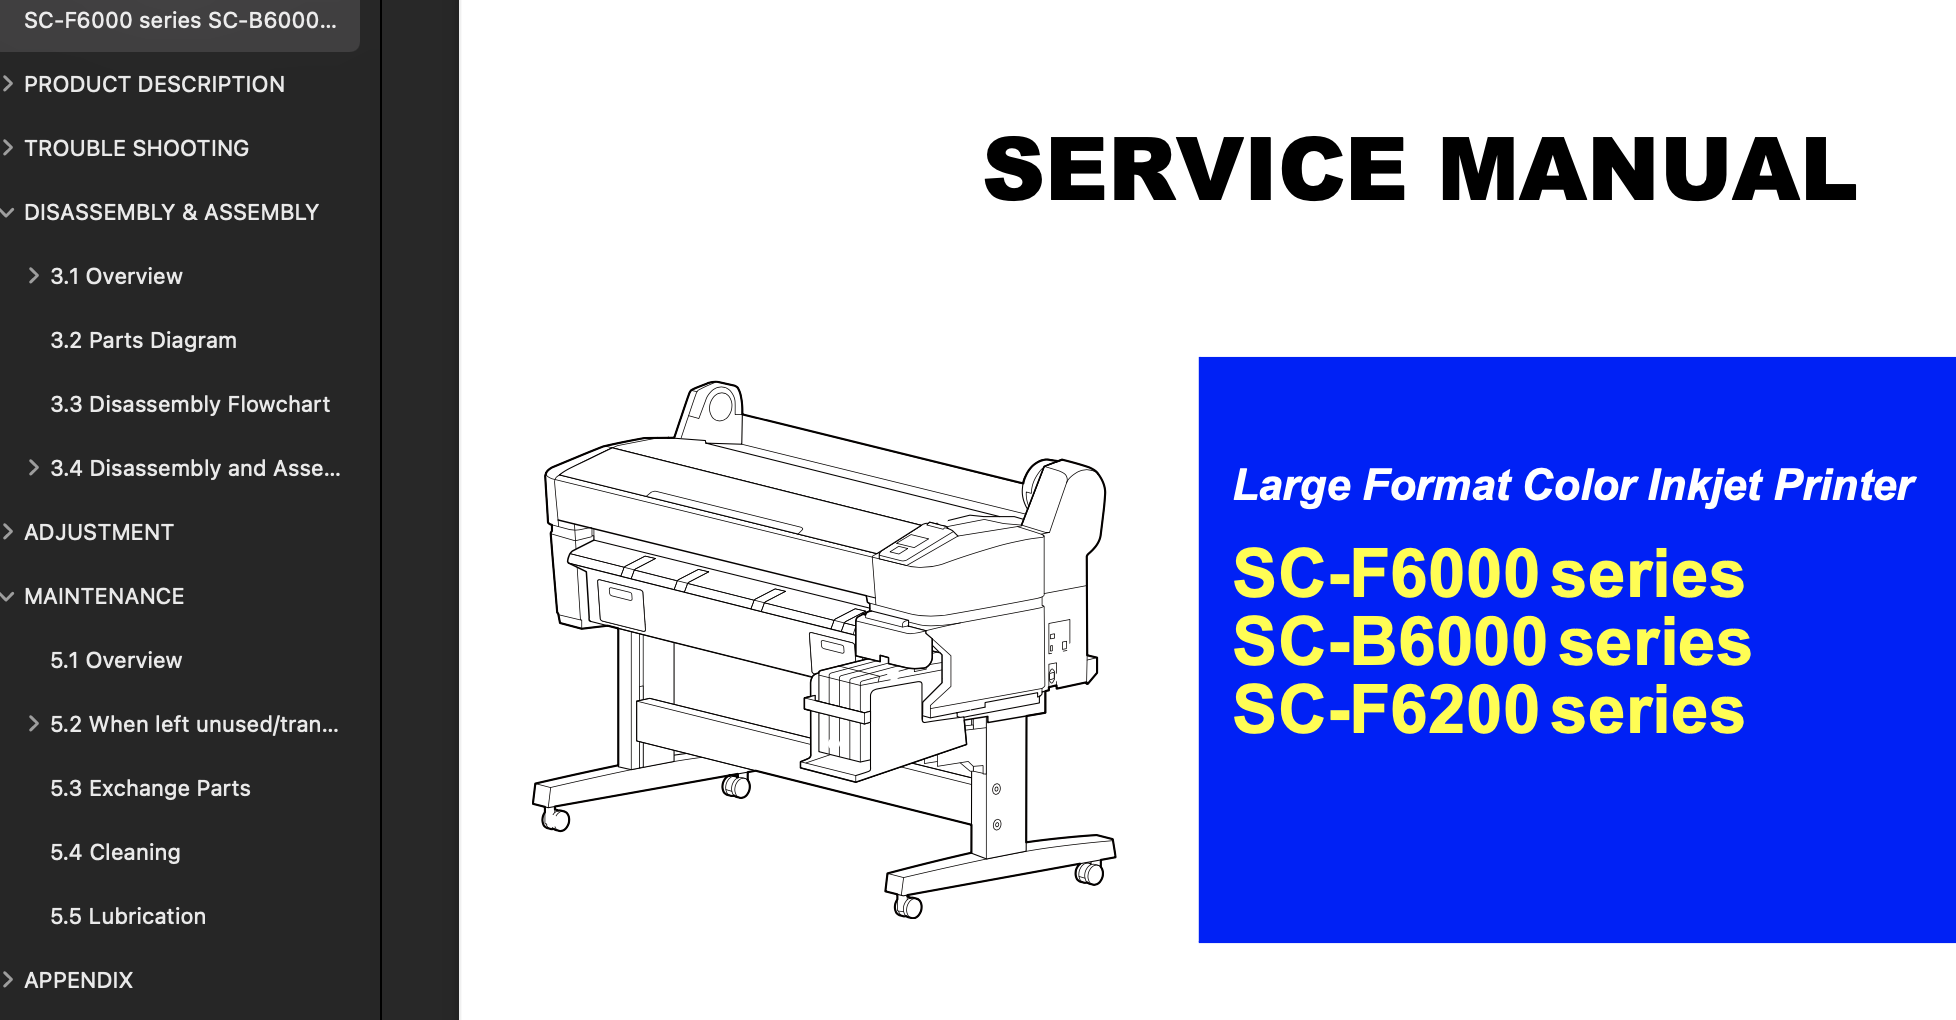 Epson Sure Color SC-F6000 Series,  SC-F6200 Series,  SC-B6000 Series  Service Manual, Parts List and Exploded Diagram <font color=red>New!</font>